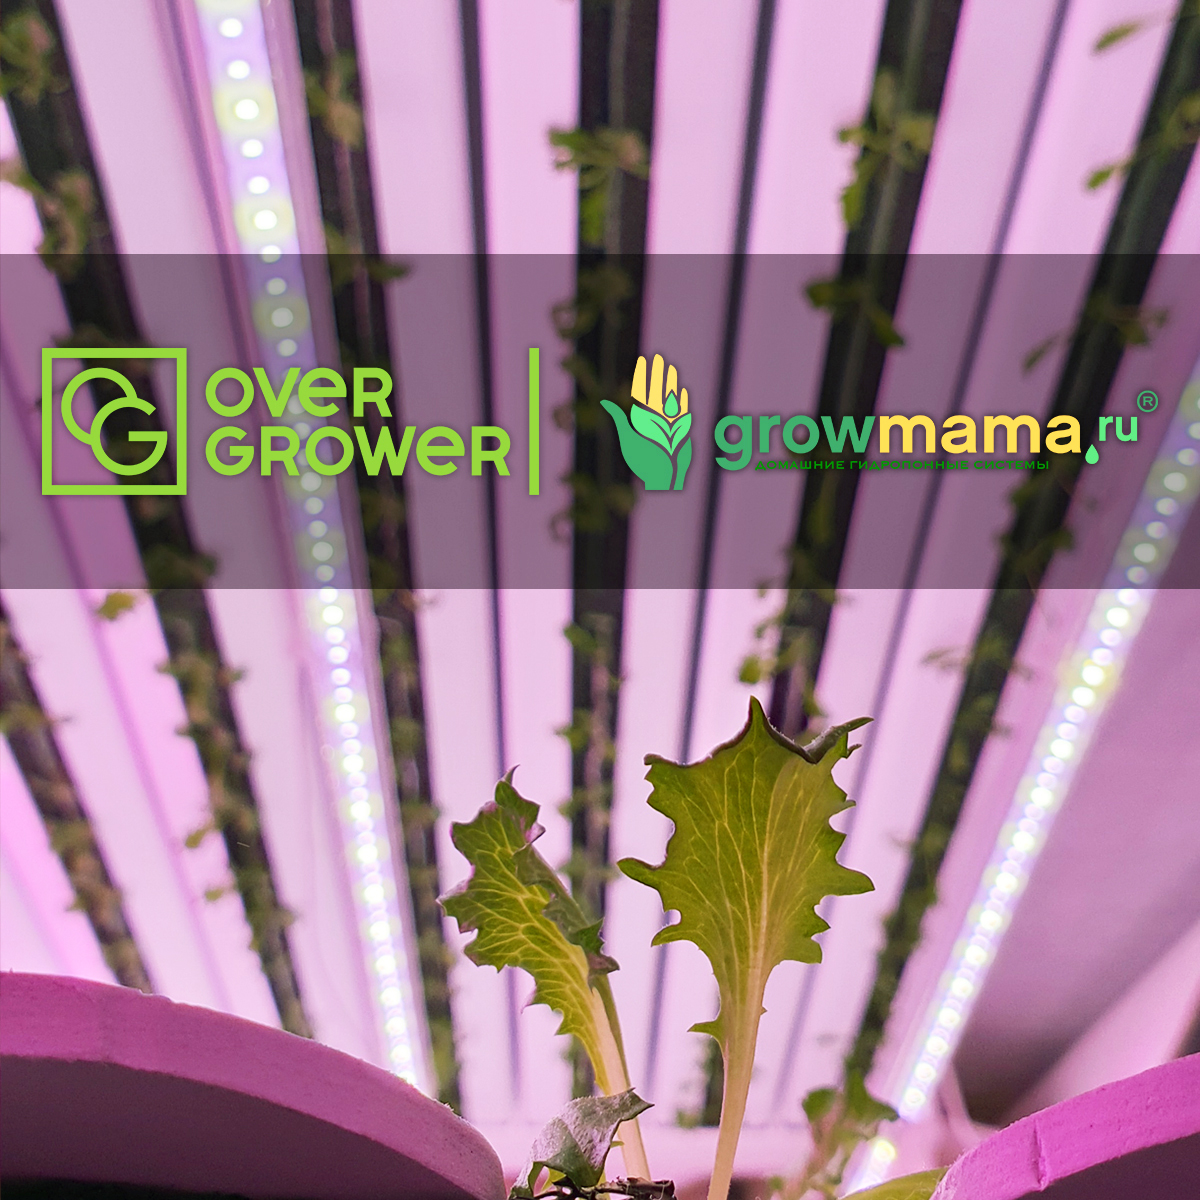 The Partnership Agreement with GrowMama executed!